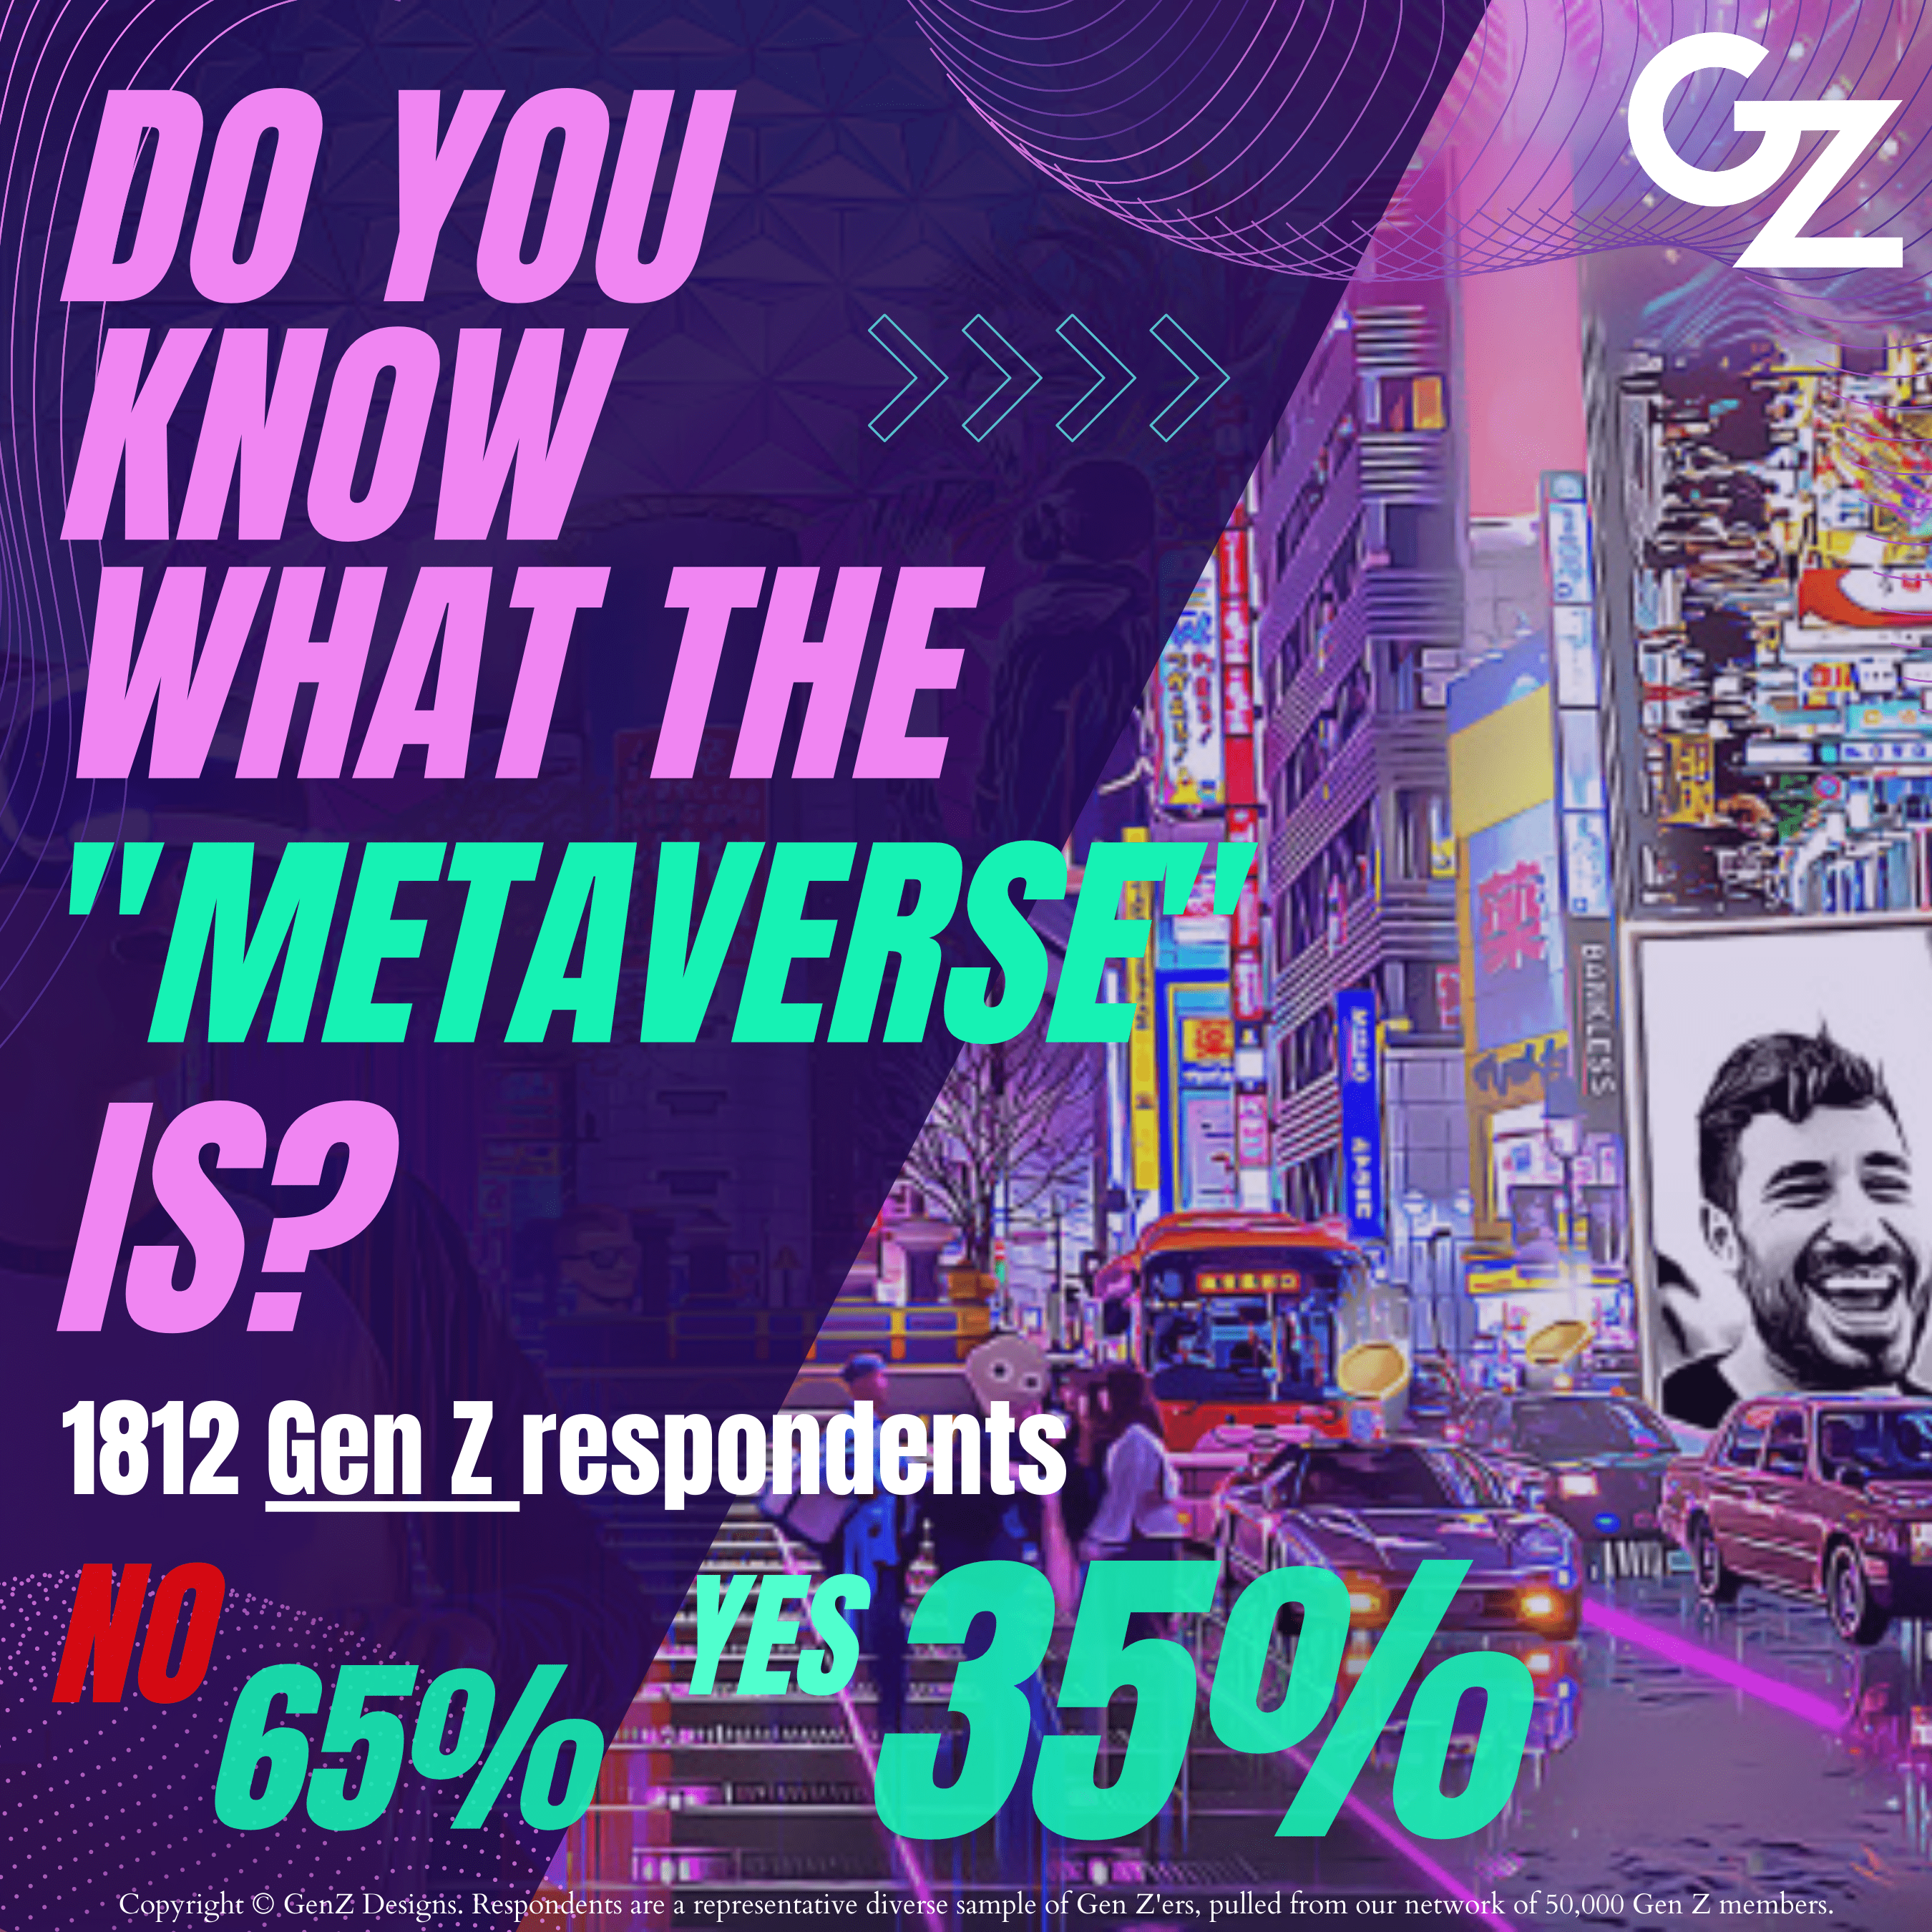 The Roblox Metaverse - What is it, and Why do Gen Z Love it?